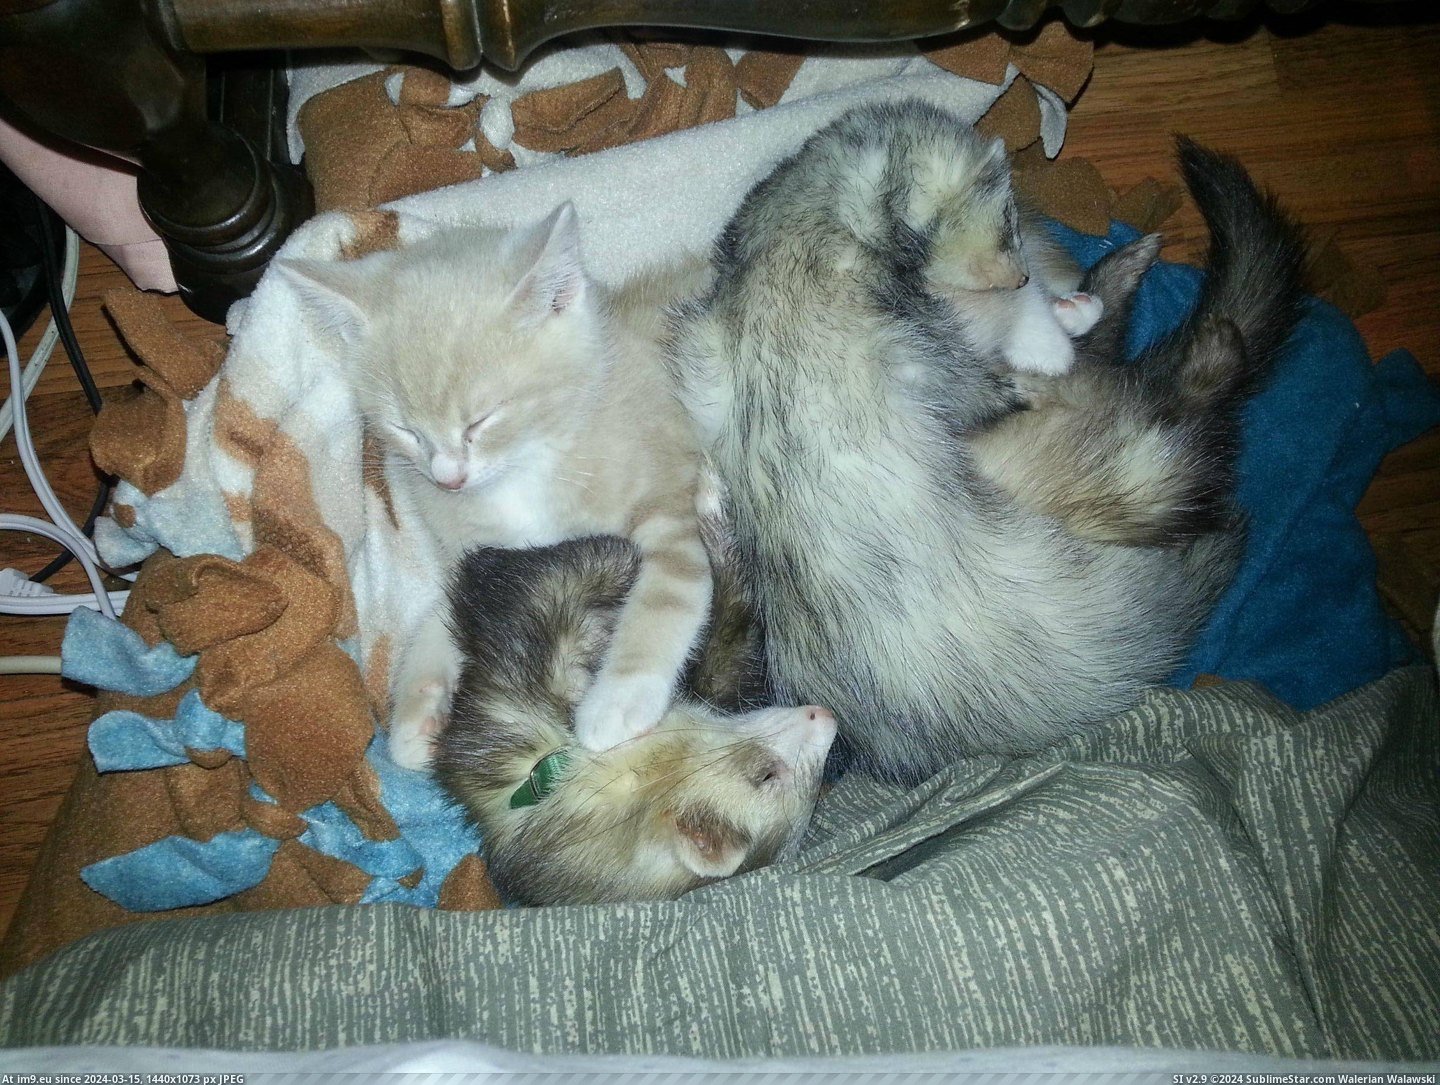 #Was #Kitten #Watch #Grow #Worried #Ferrets #Him #Early #Introducing [Aww] In early June I took home a kitten and was worried about introducing him to my ferrets. Watch him grow up with them. :) (L Pic. (Image of album My r/AWW favs))